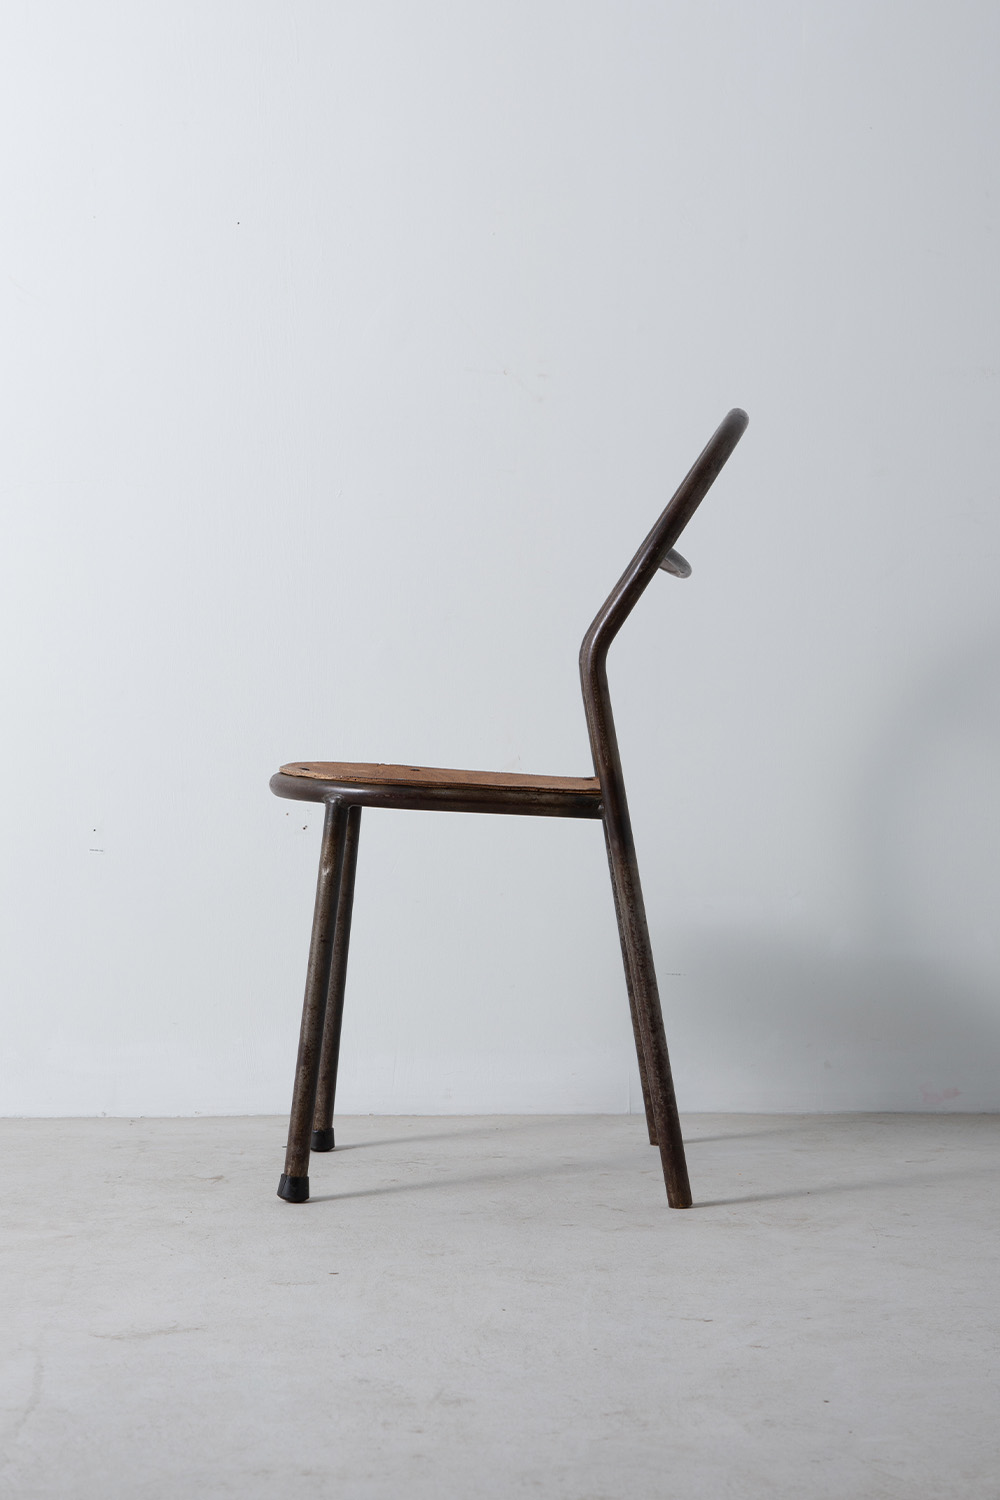 Industrial BAUHAUS Style Chair in Steel and Wood